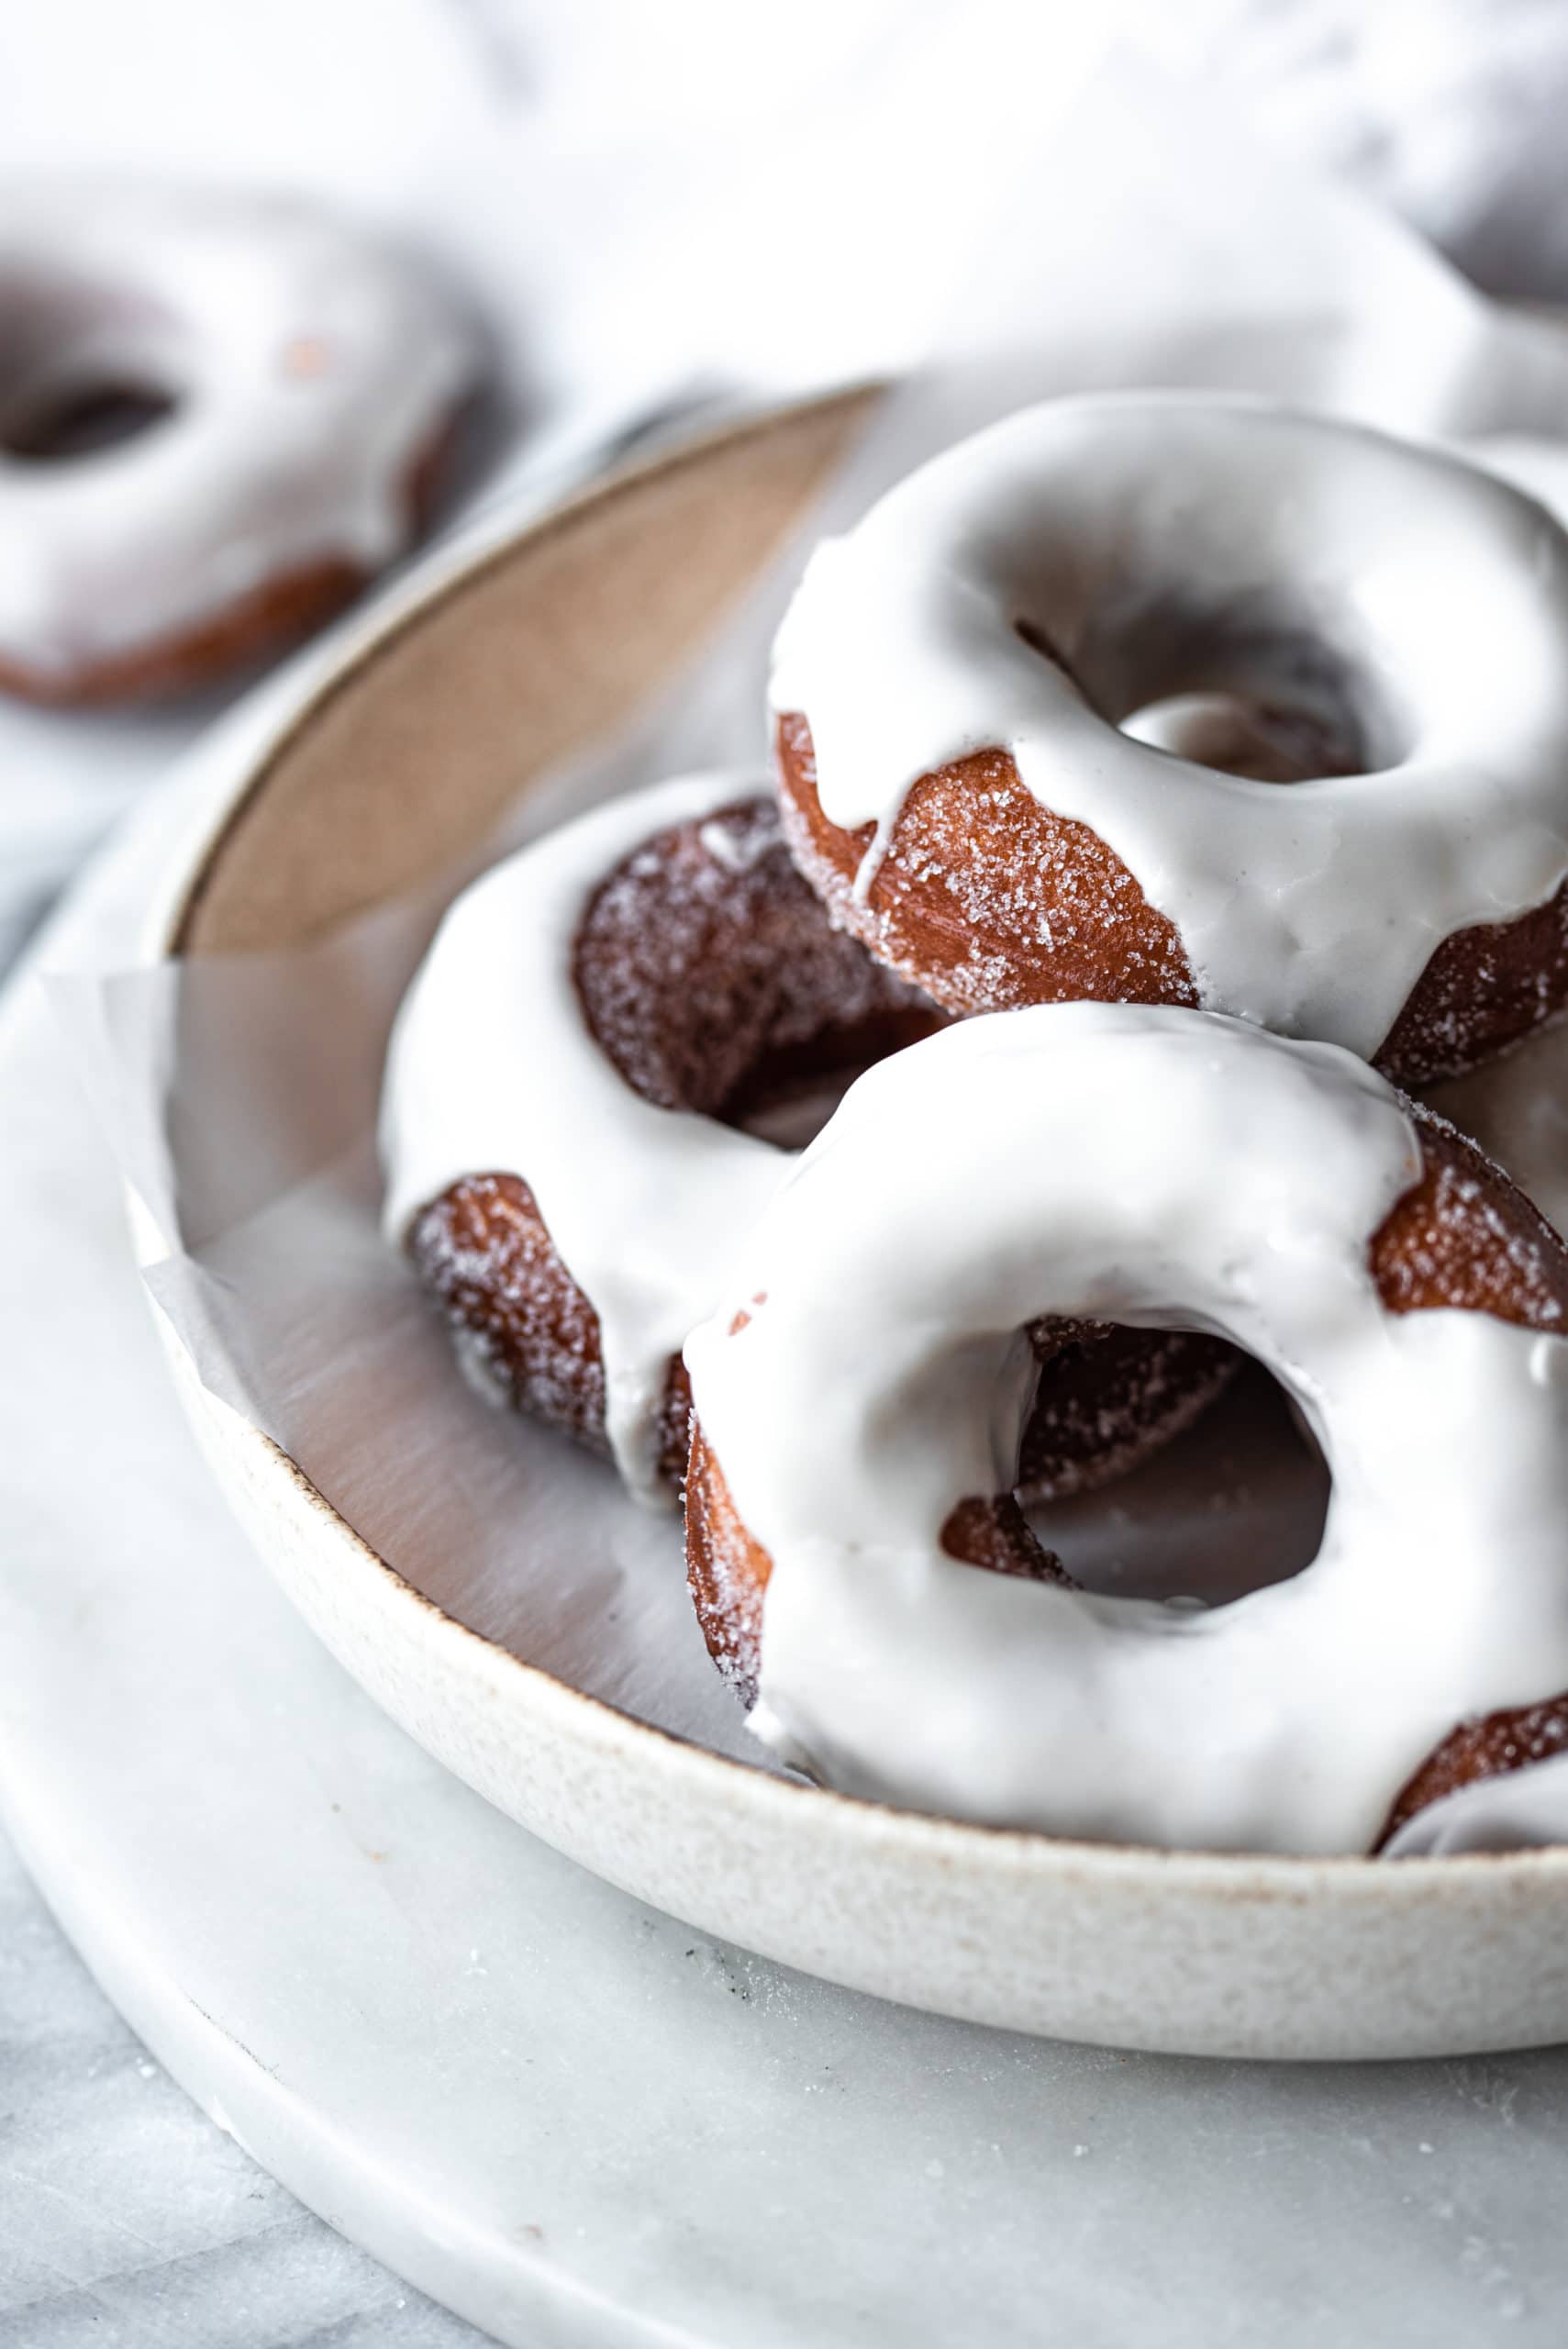 Classic Glazed Doughnuts Recipe - NYT Cooking